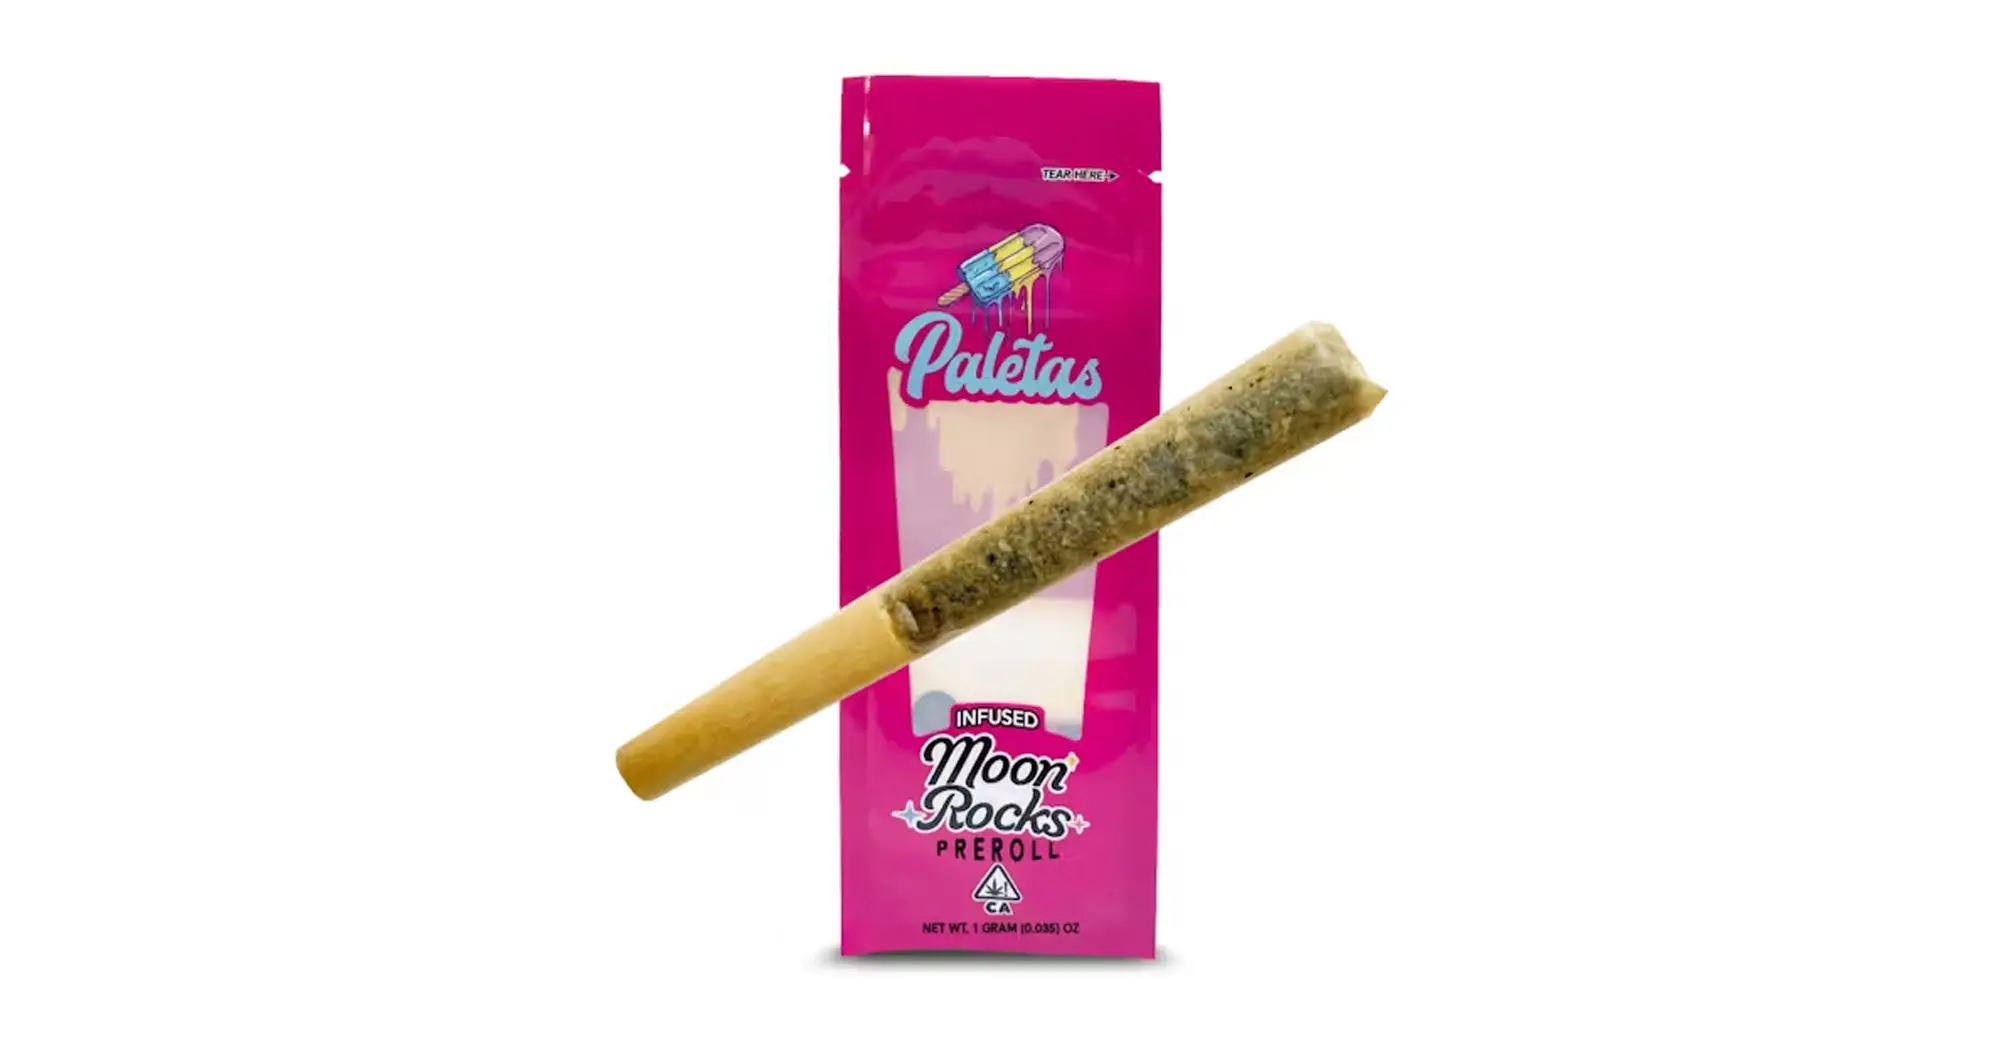 Guava Kush Moonrock Infused Pre-Roll